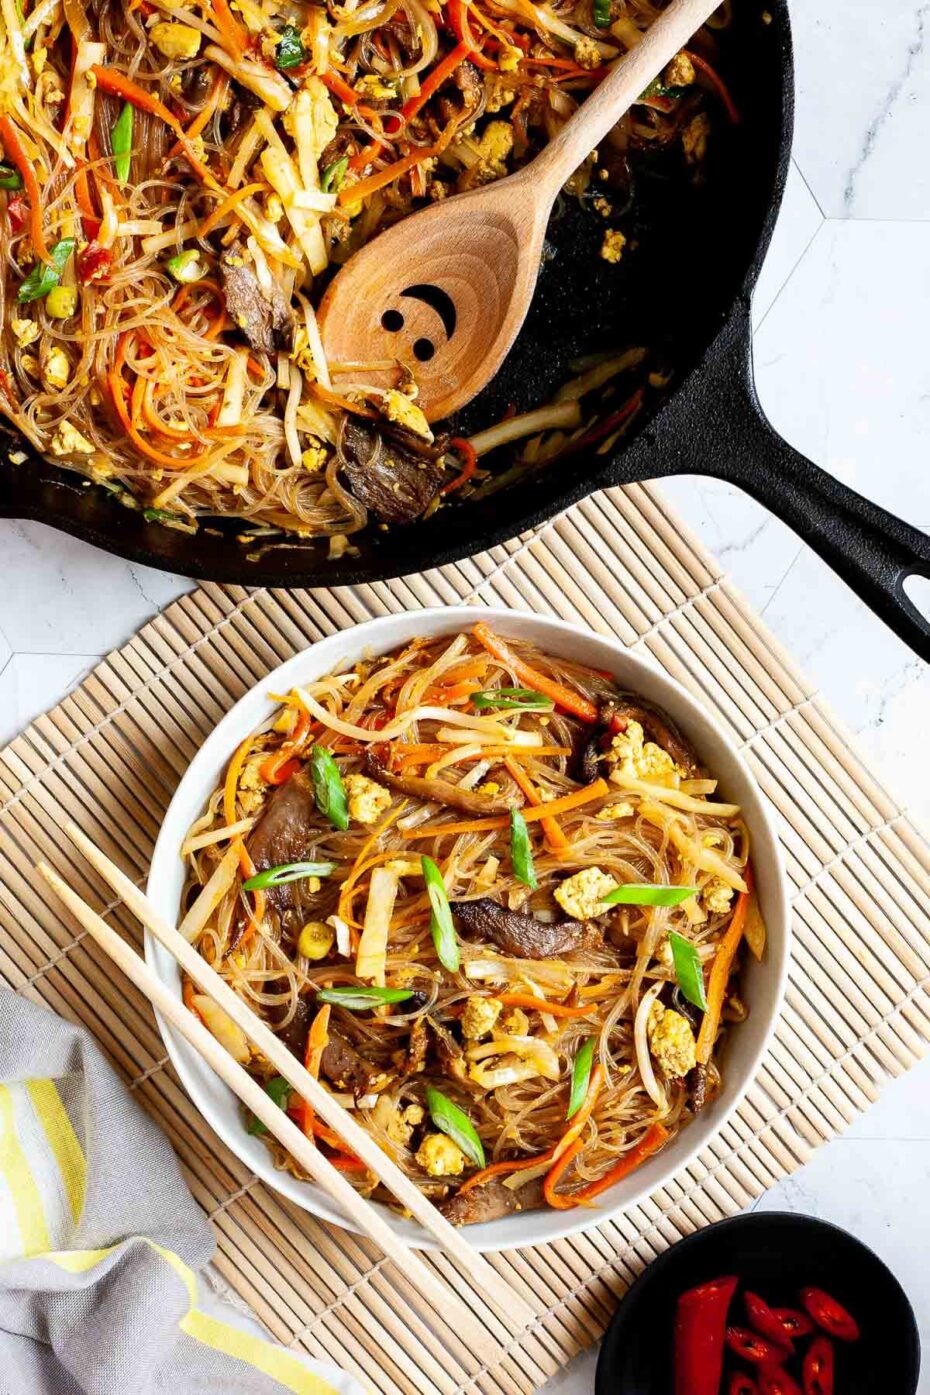 Black skillet from above full of glass noodles, shredded carrots, cabbage, sliced green onion, bean sprouts, mushroom shreds with a smiling wooden spatula. A white serving plate with chopsticks on it have the same contents